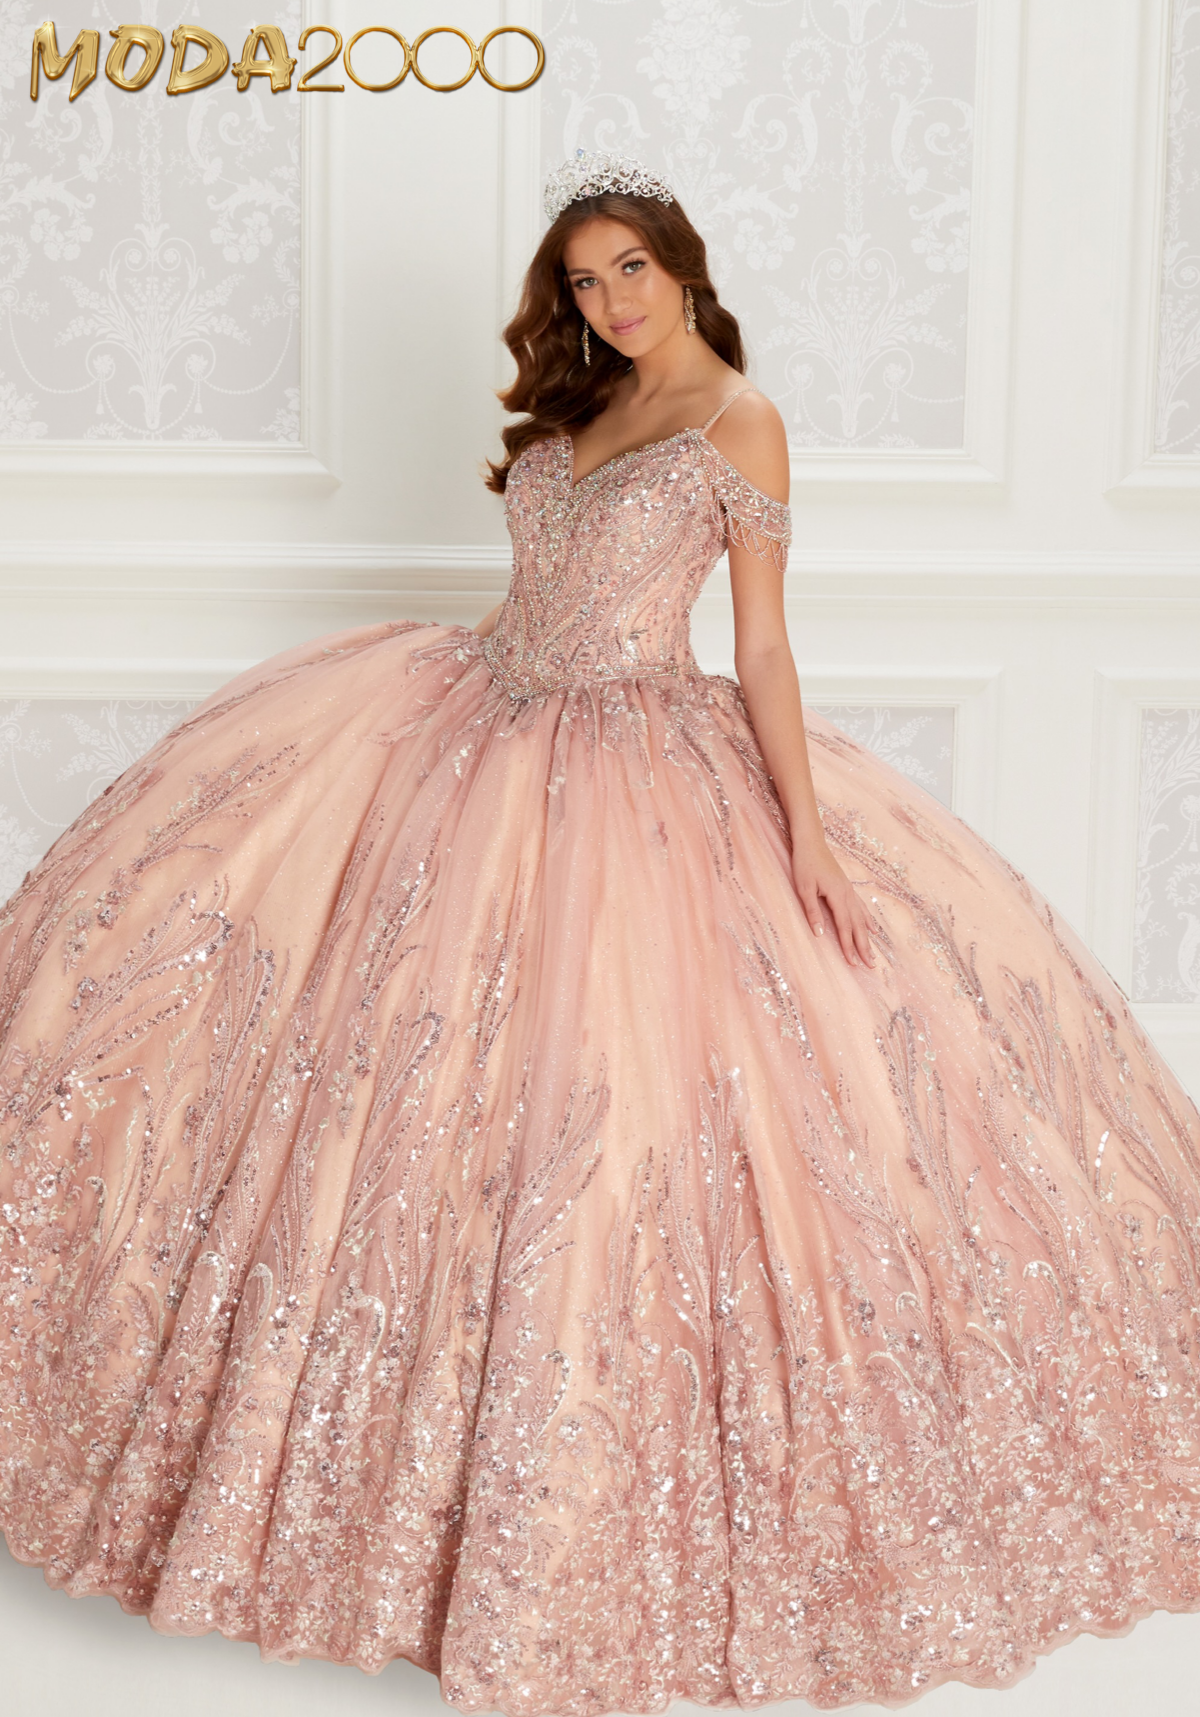 Quinceanera Dresses – Tagged "Rose Gold"– 2000 LLC